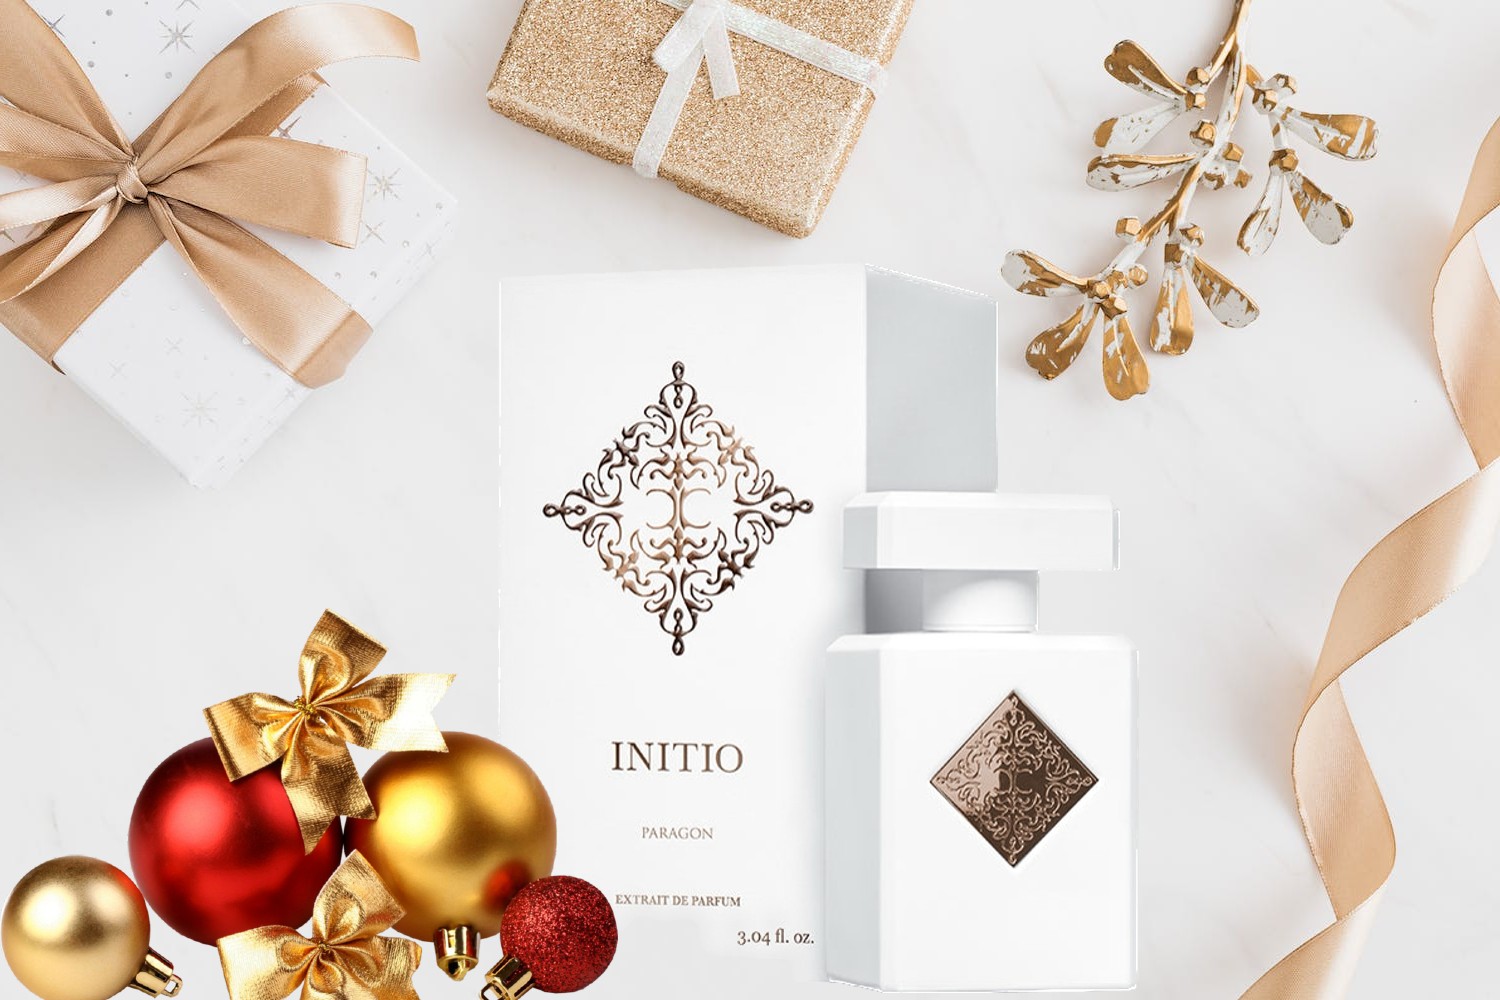 Give The Gift of Paragon From Initio Parfums